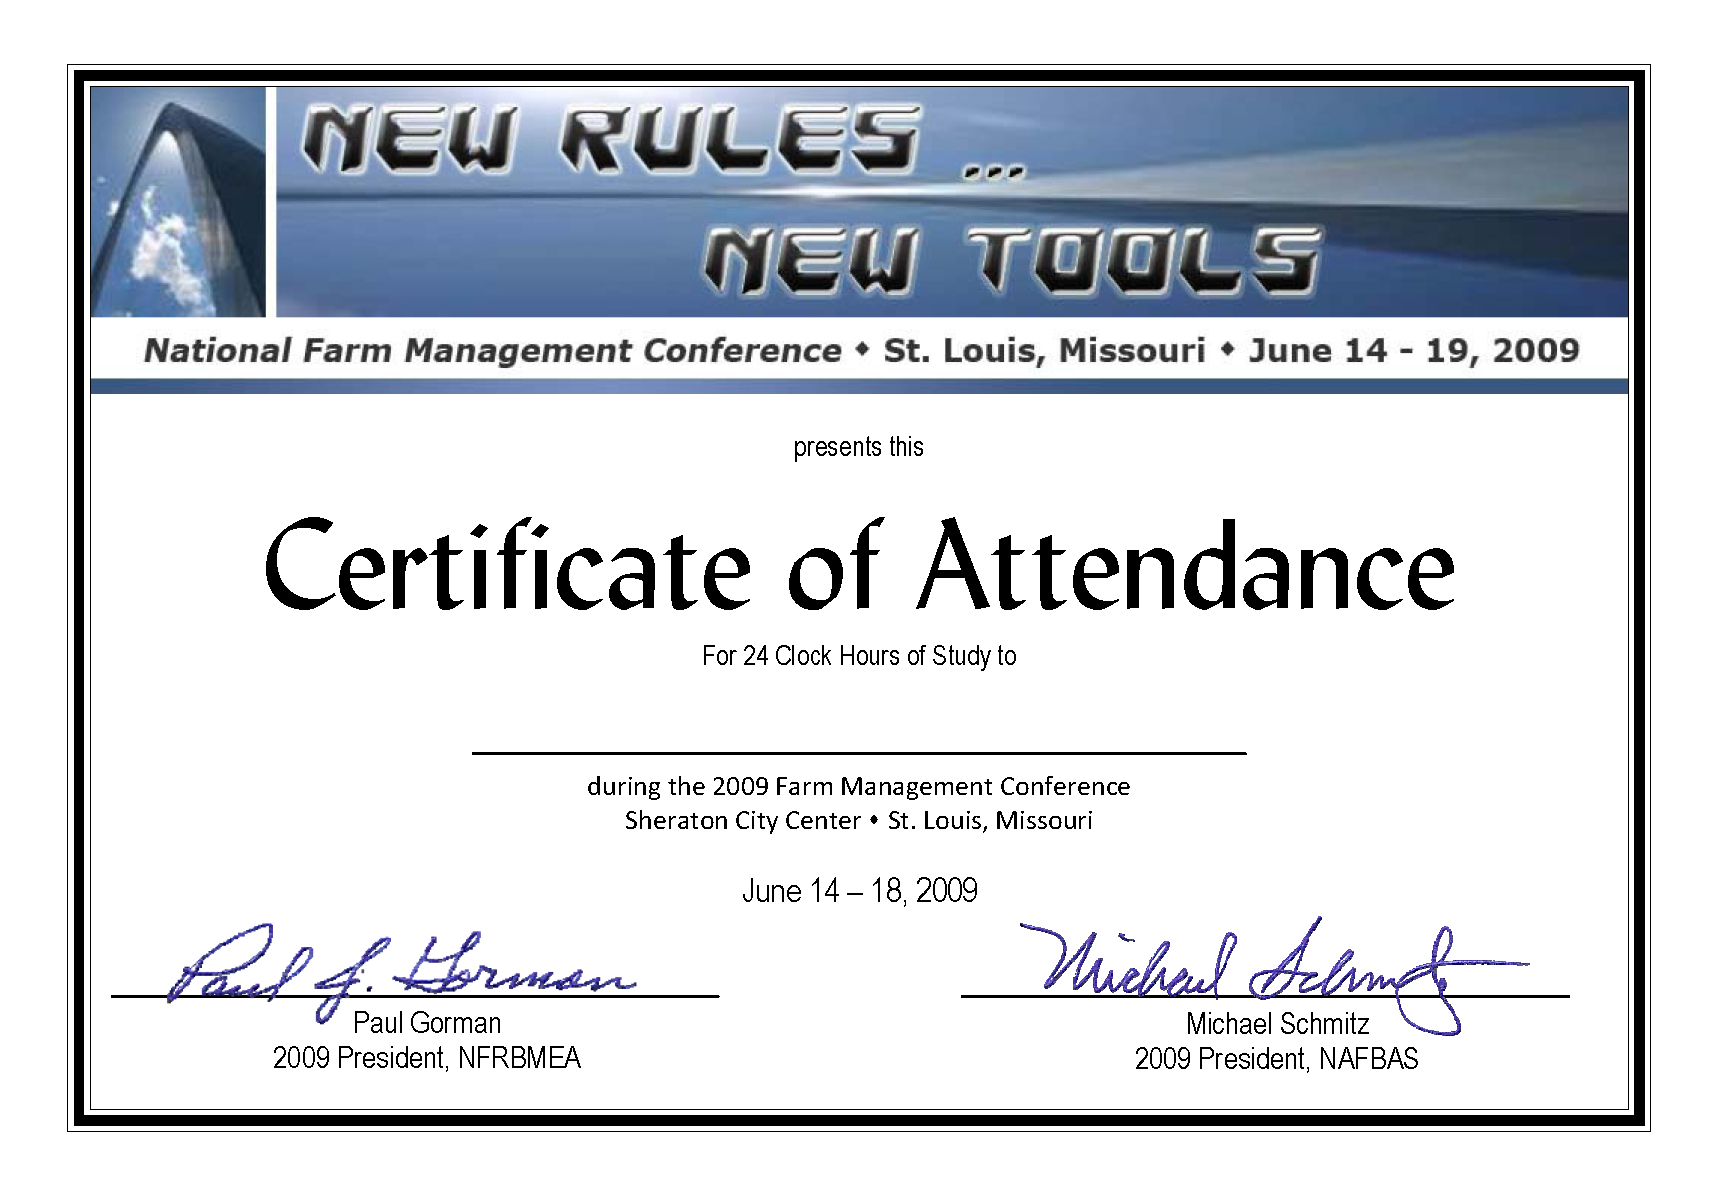 Conference Certificate Of Attendance Template - Great inside Conference Certificate Of Attendance Template